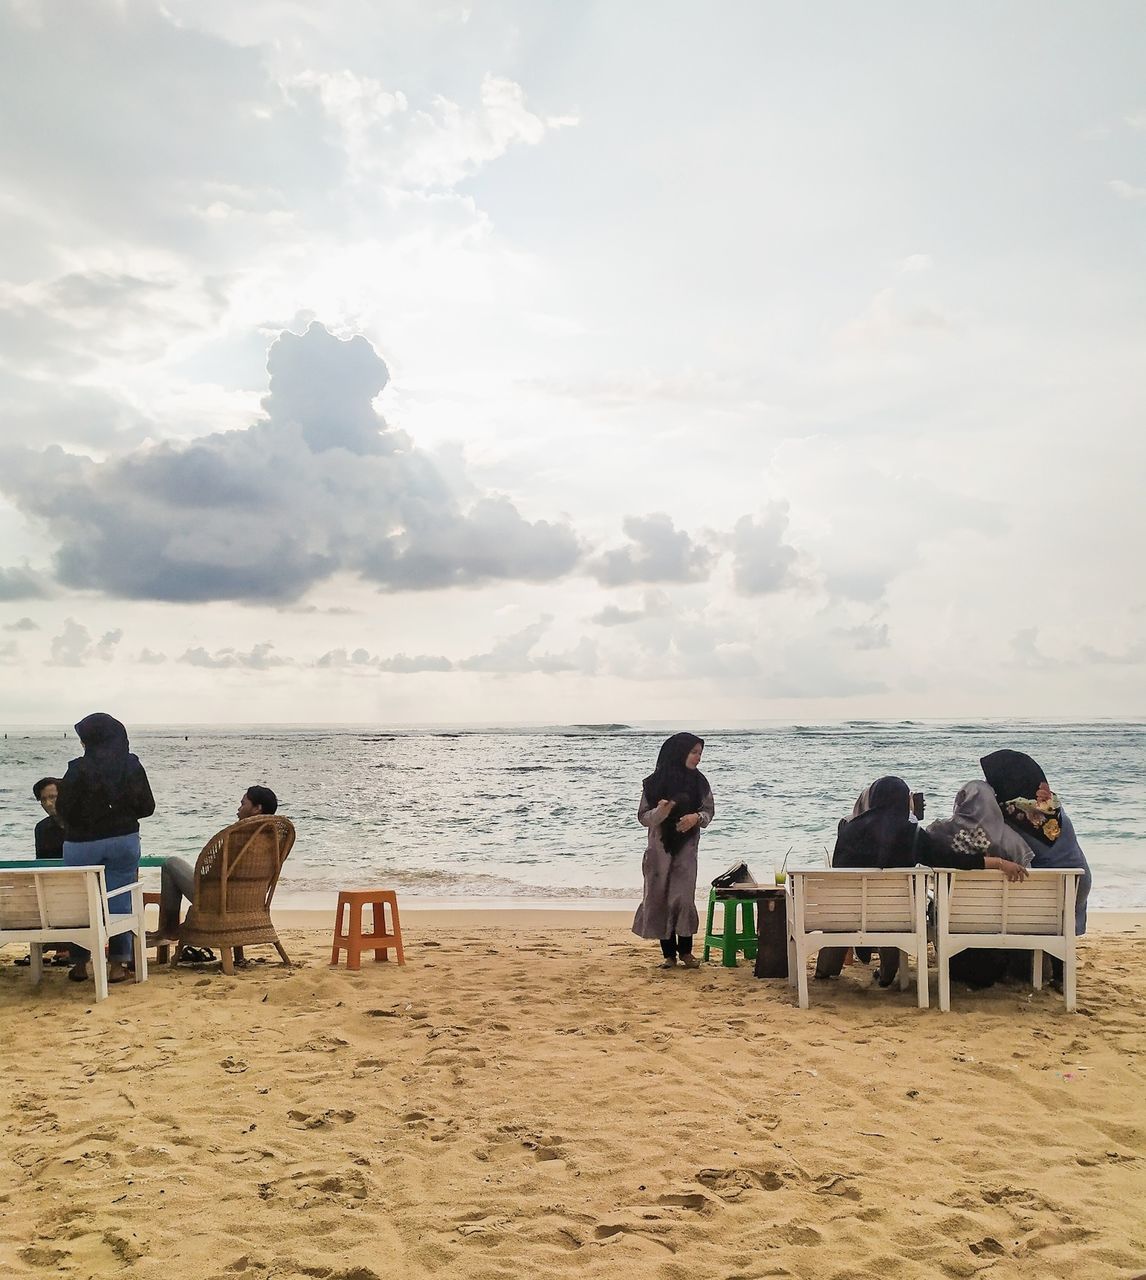 beach, land, sea, sky, sand, group of people, real people, sitting, water, cloud - sky, leisure activity, men, lifestyles, women, nature, beauty in nature, seat, scenics - nature, relaxation, outdoors, horizon over water